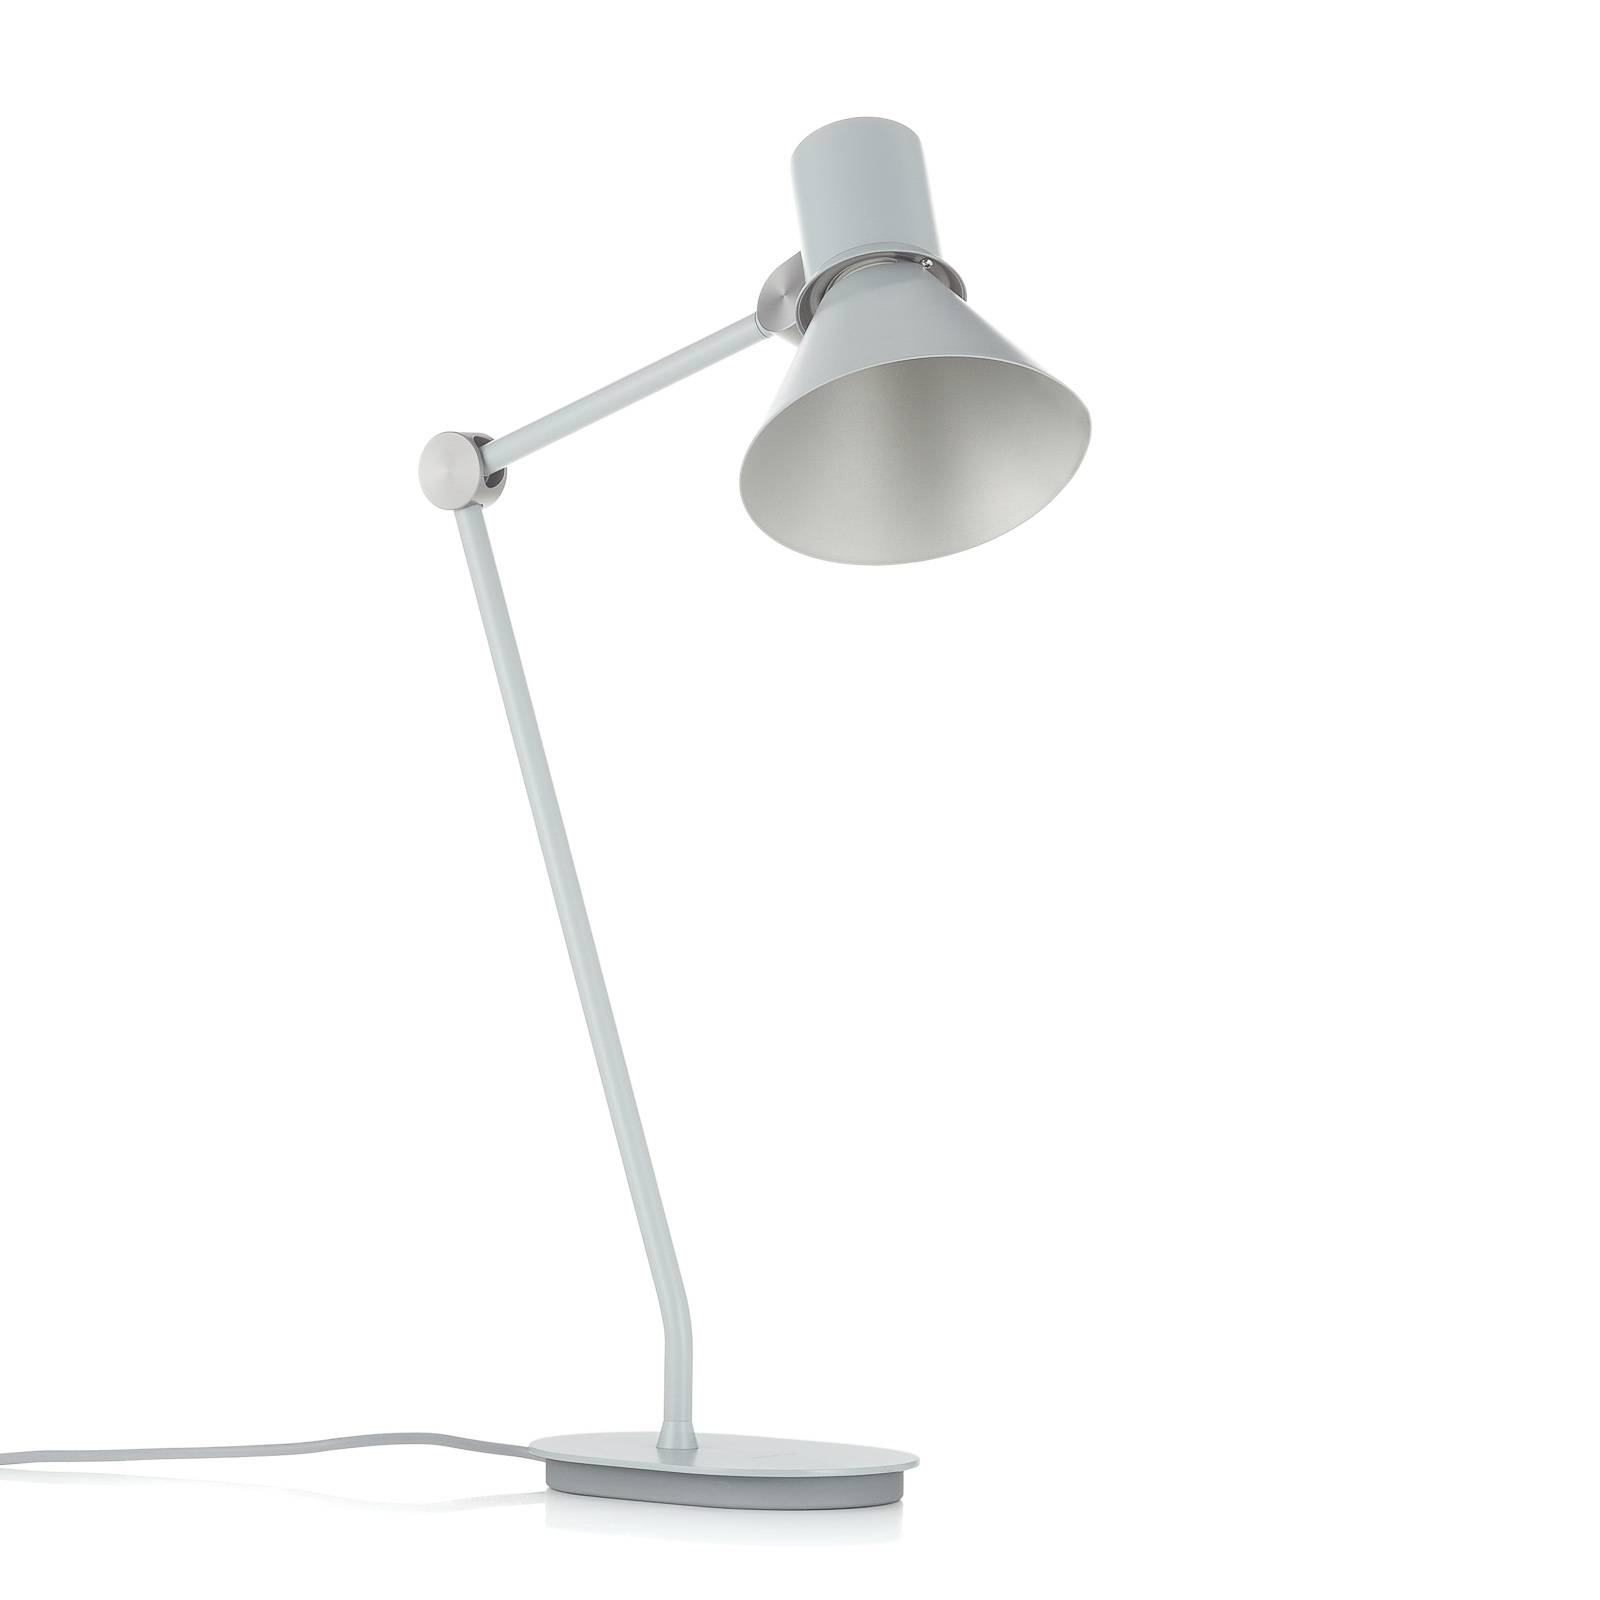 Anglepoise Type 80 table lamp, mist grey